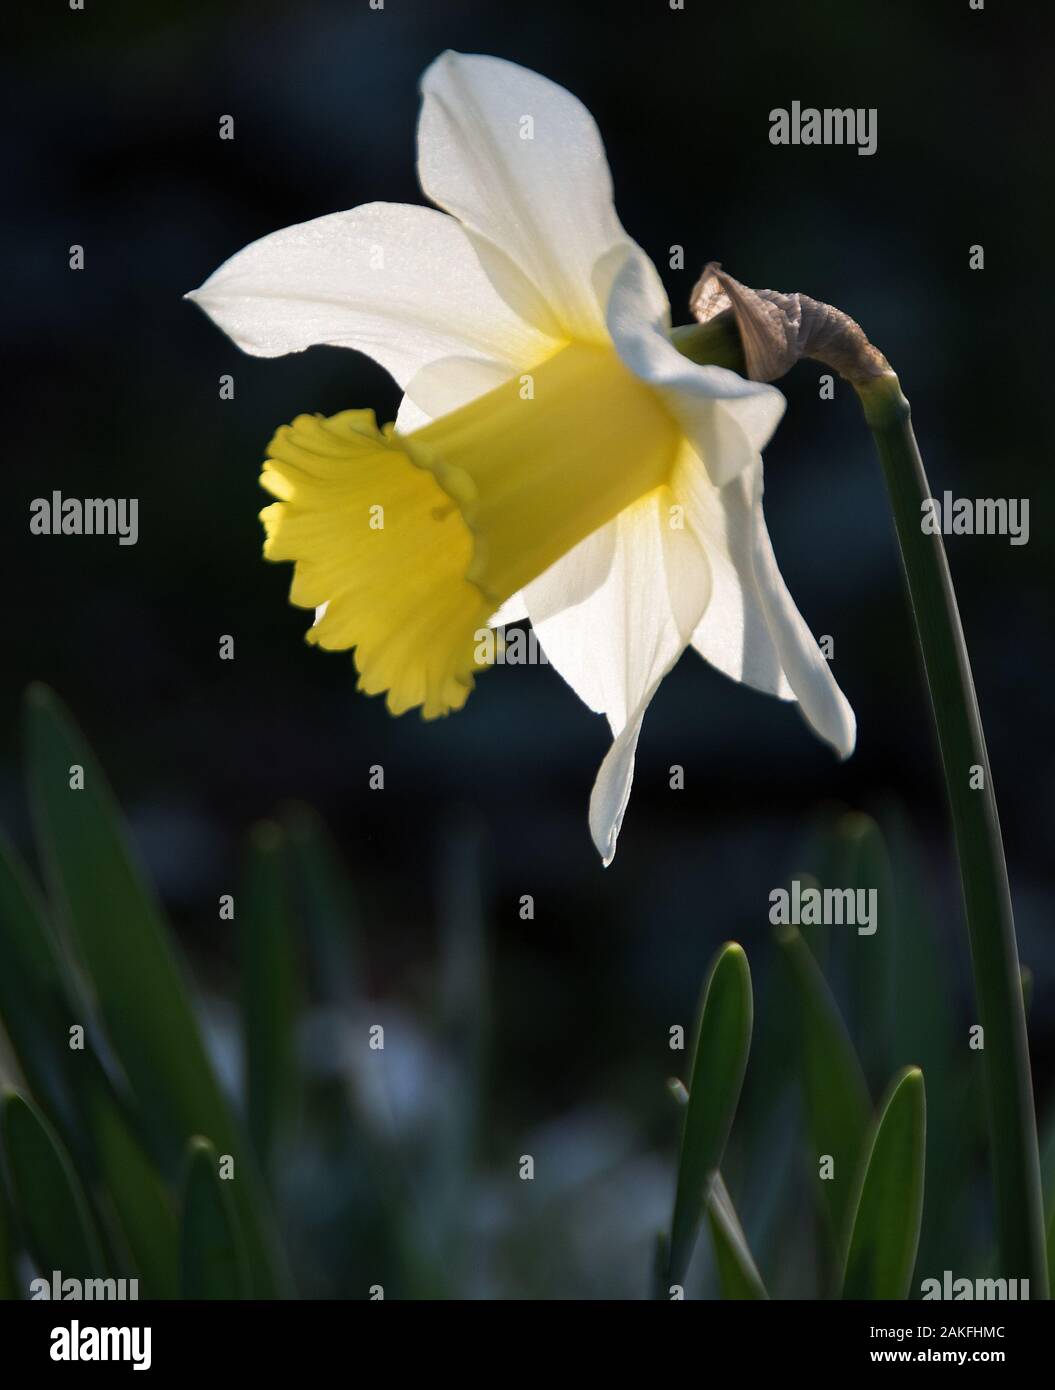 Narcissus 'February Silver' back-lit Stock Photo